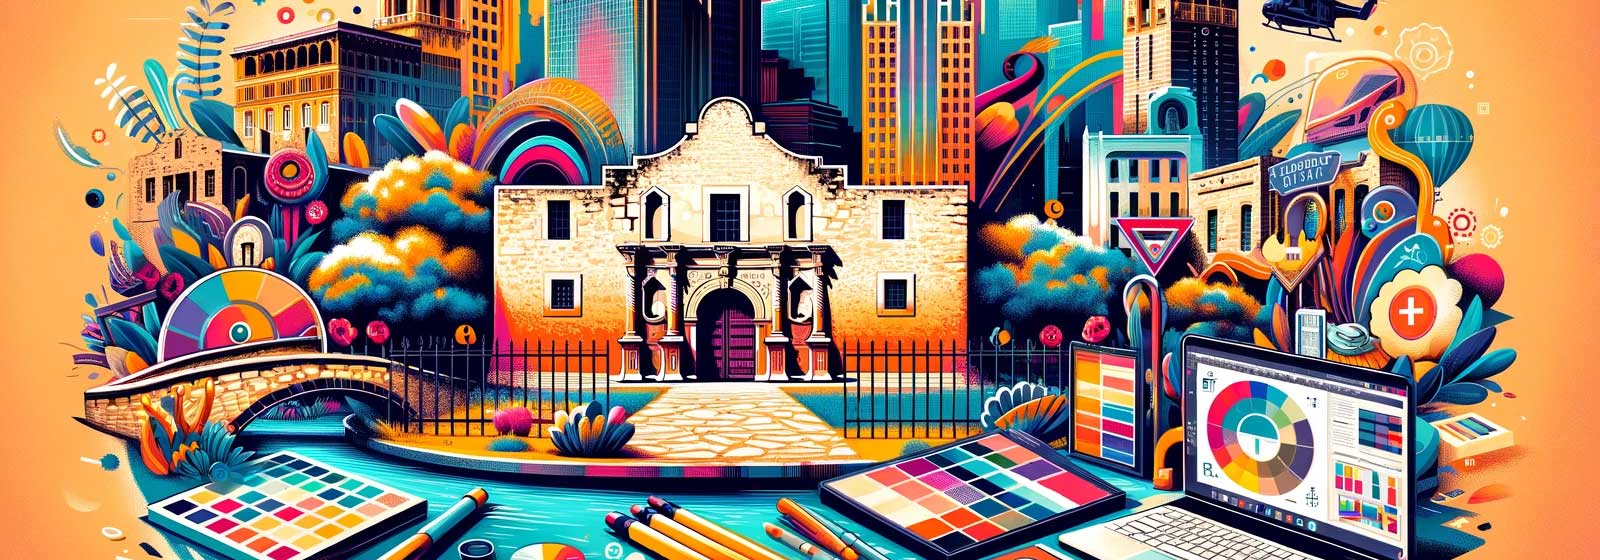 Banner for 'Graphic Design San Antonio' featuring iconic landmarks and graphic design elements on a vibrant background.